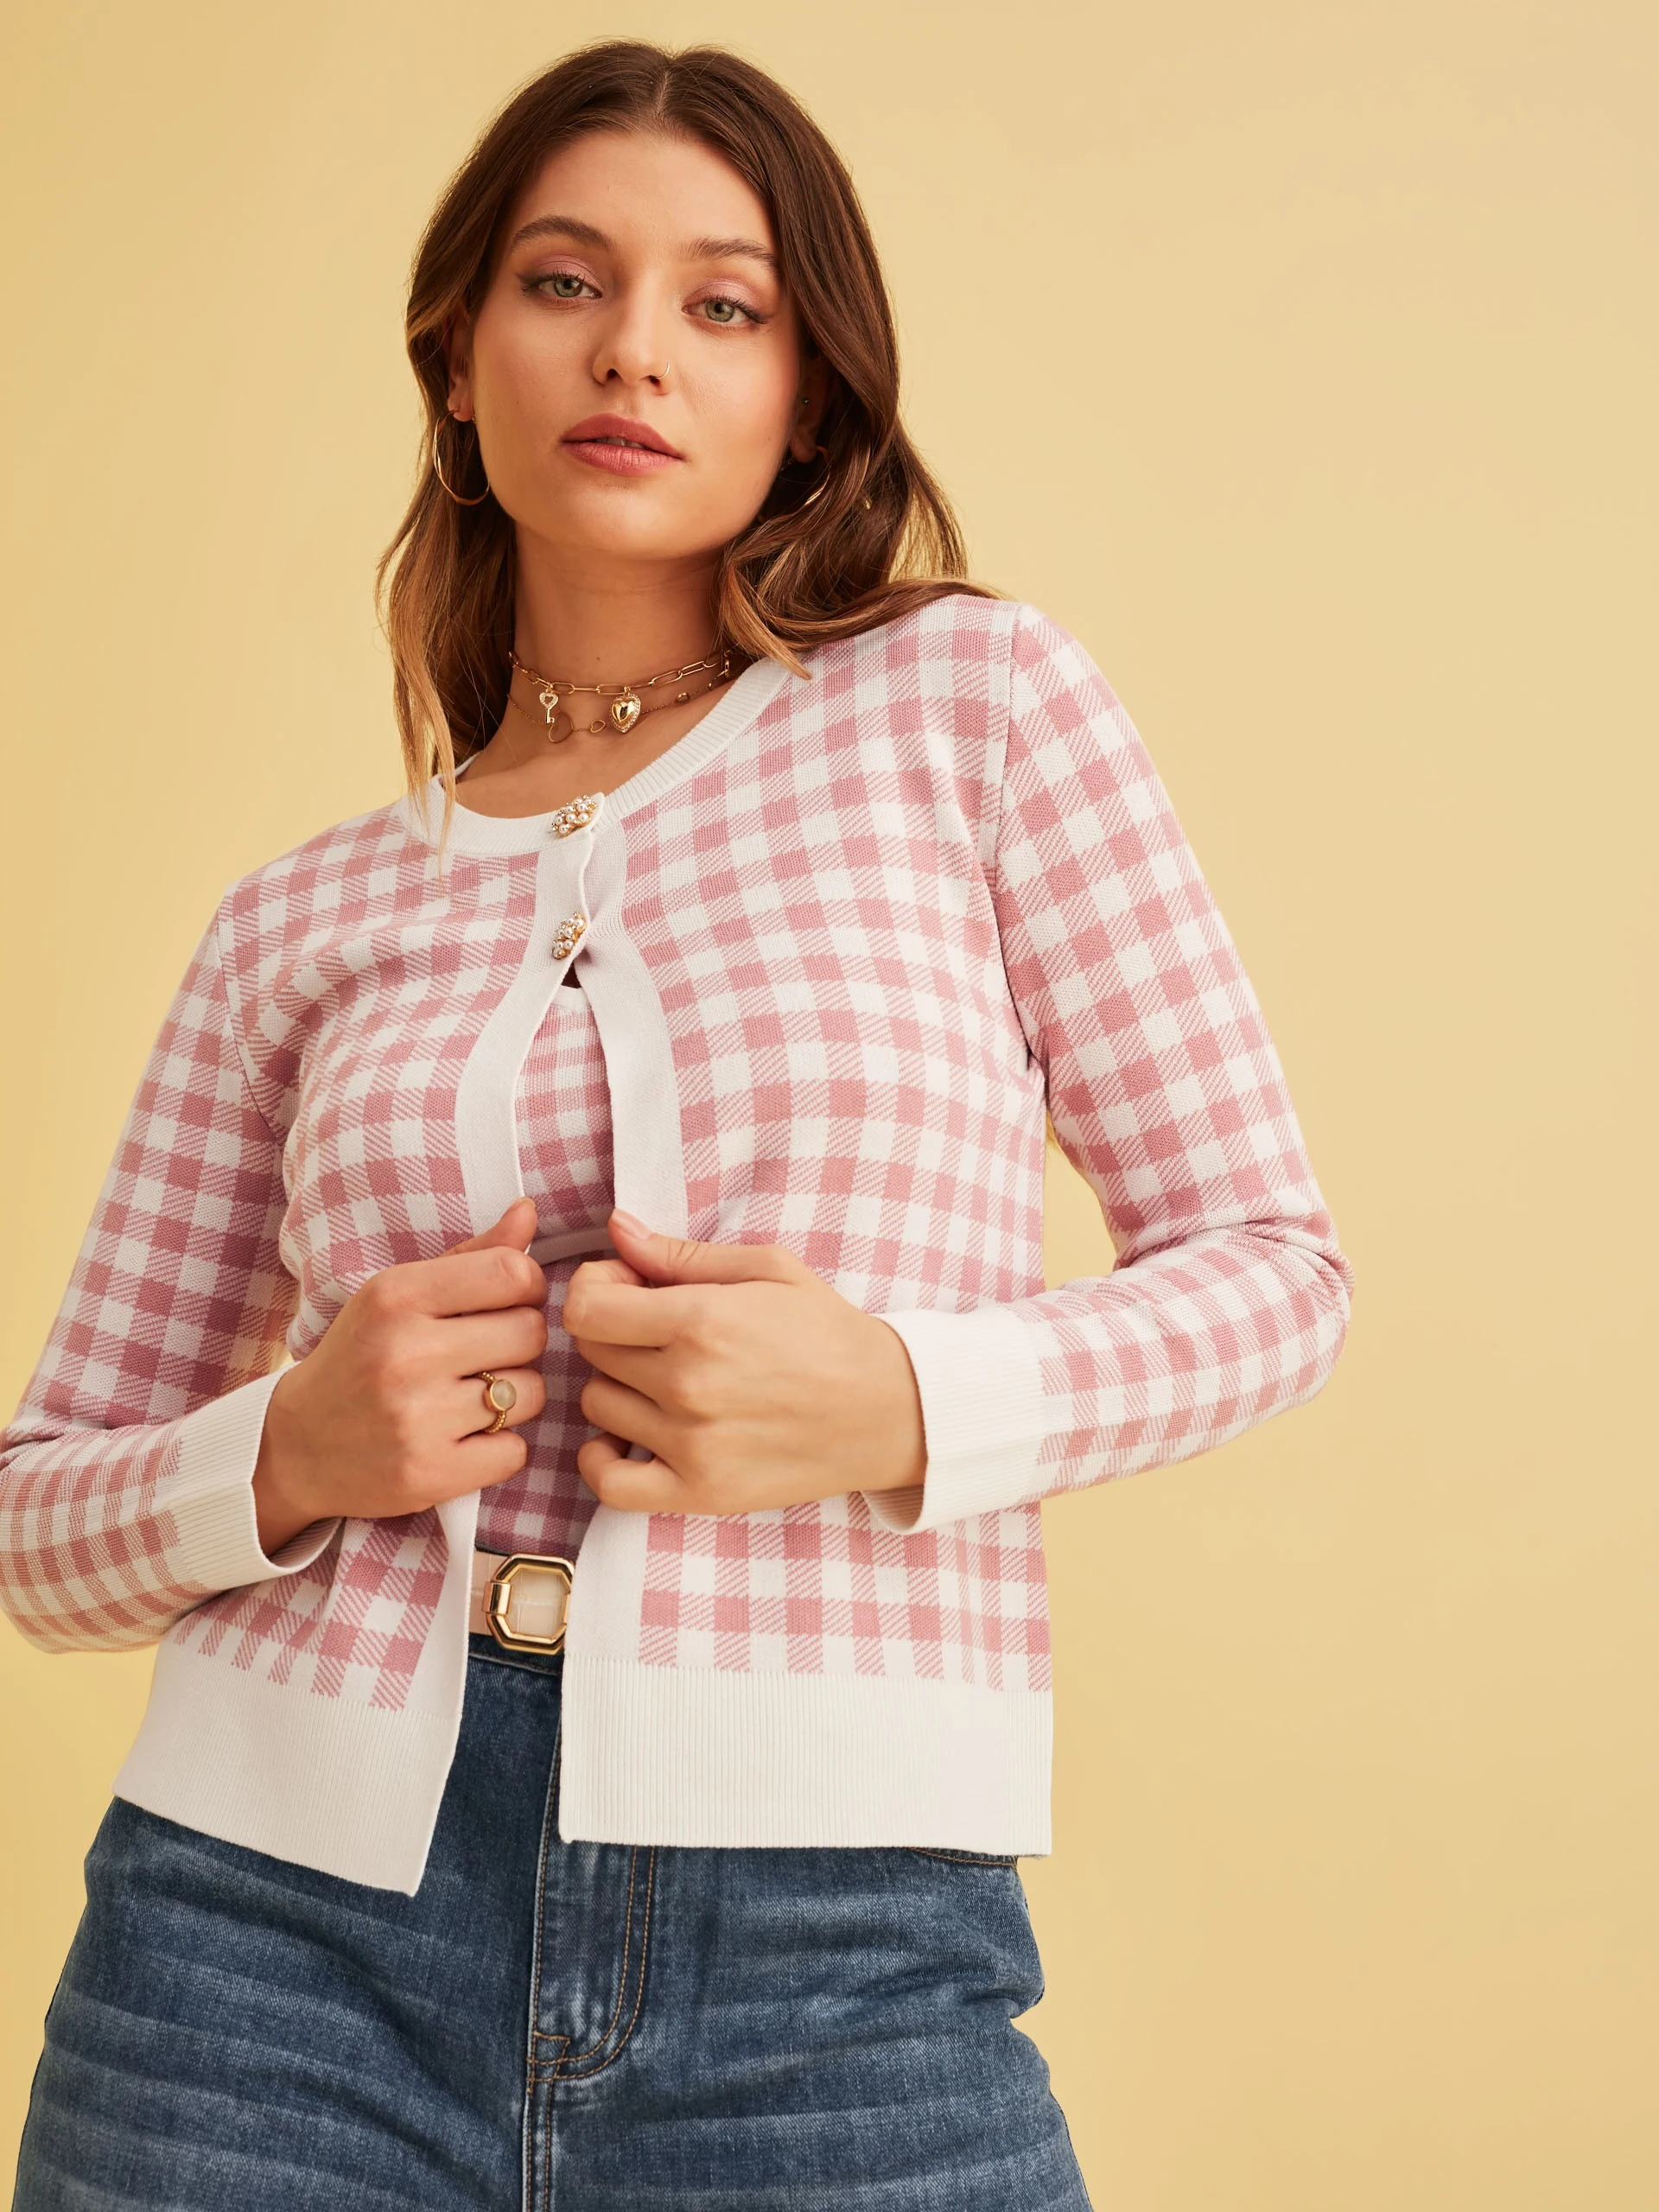 PINK AND WHITE CHECKED SWEATER